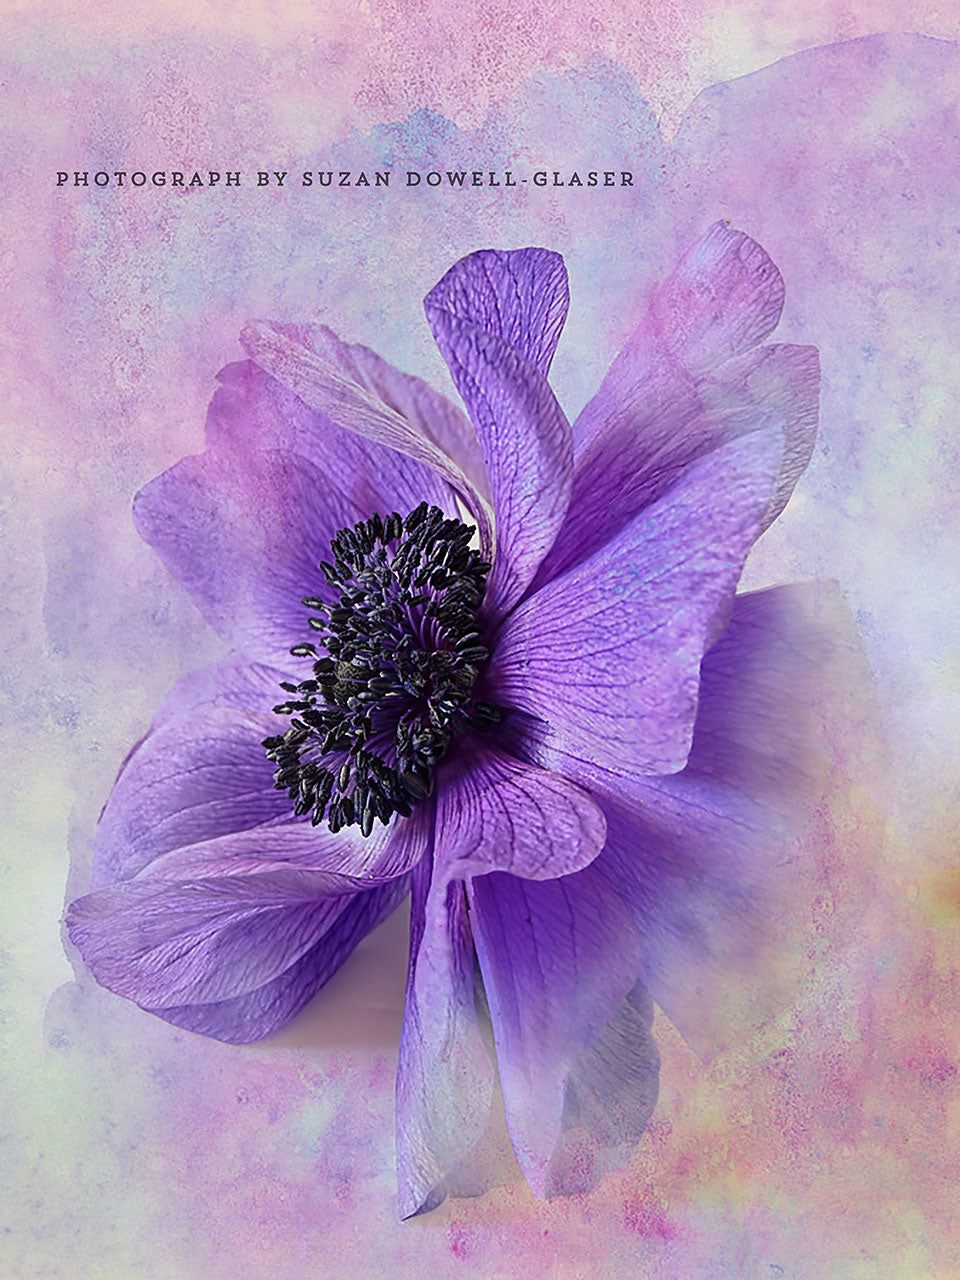 Anemone photograph by Suzan Dowell-Glaser with a watercolor texture by French Kiss Collections.